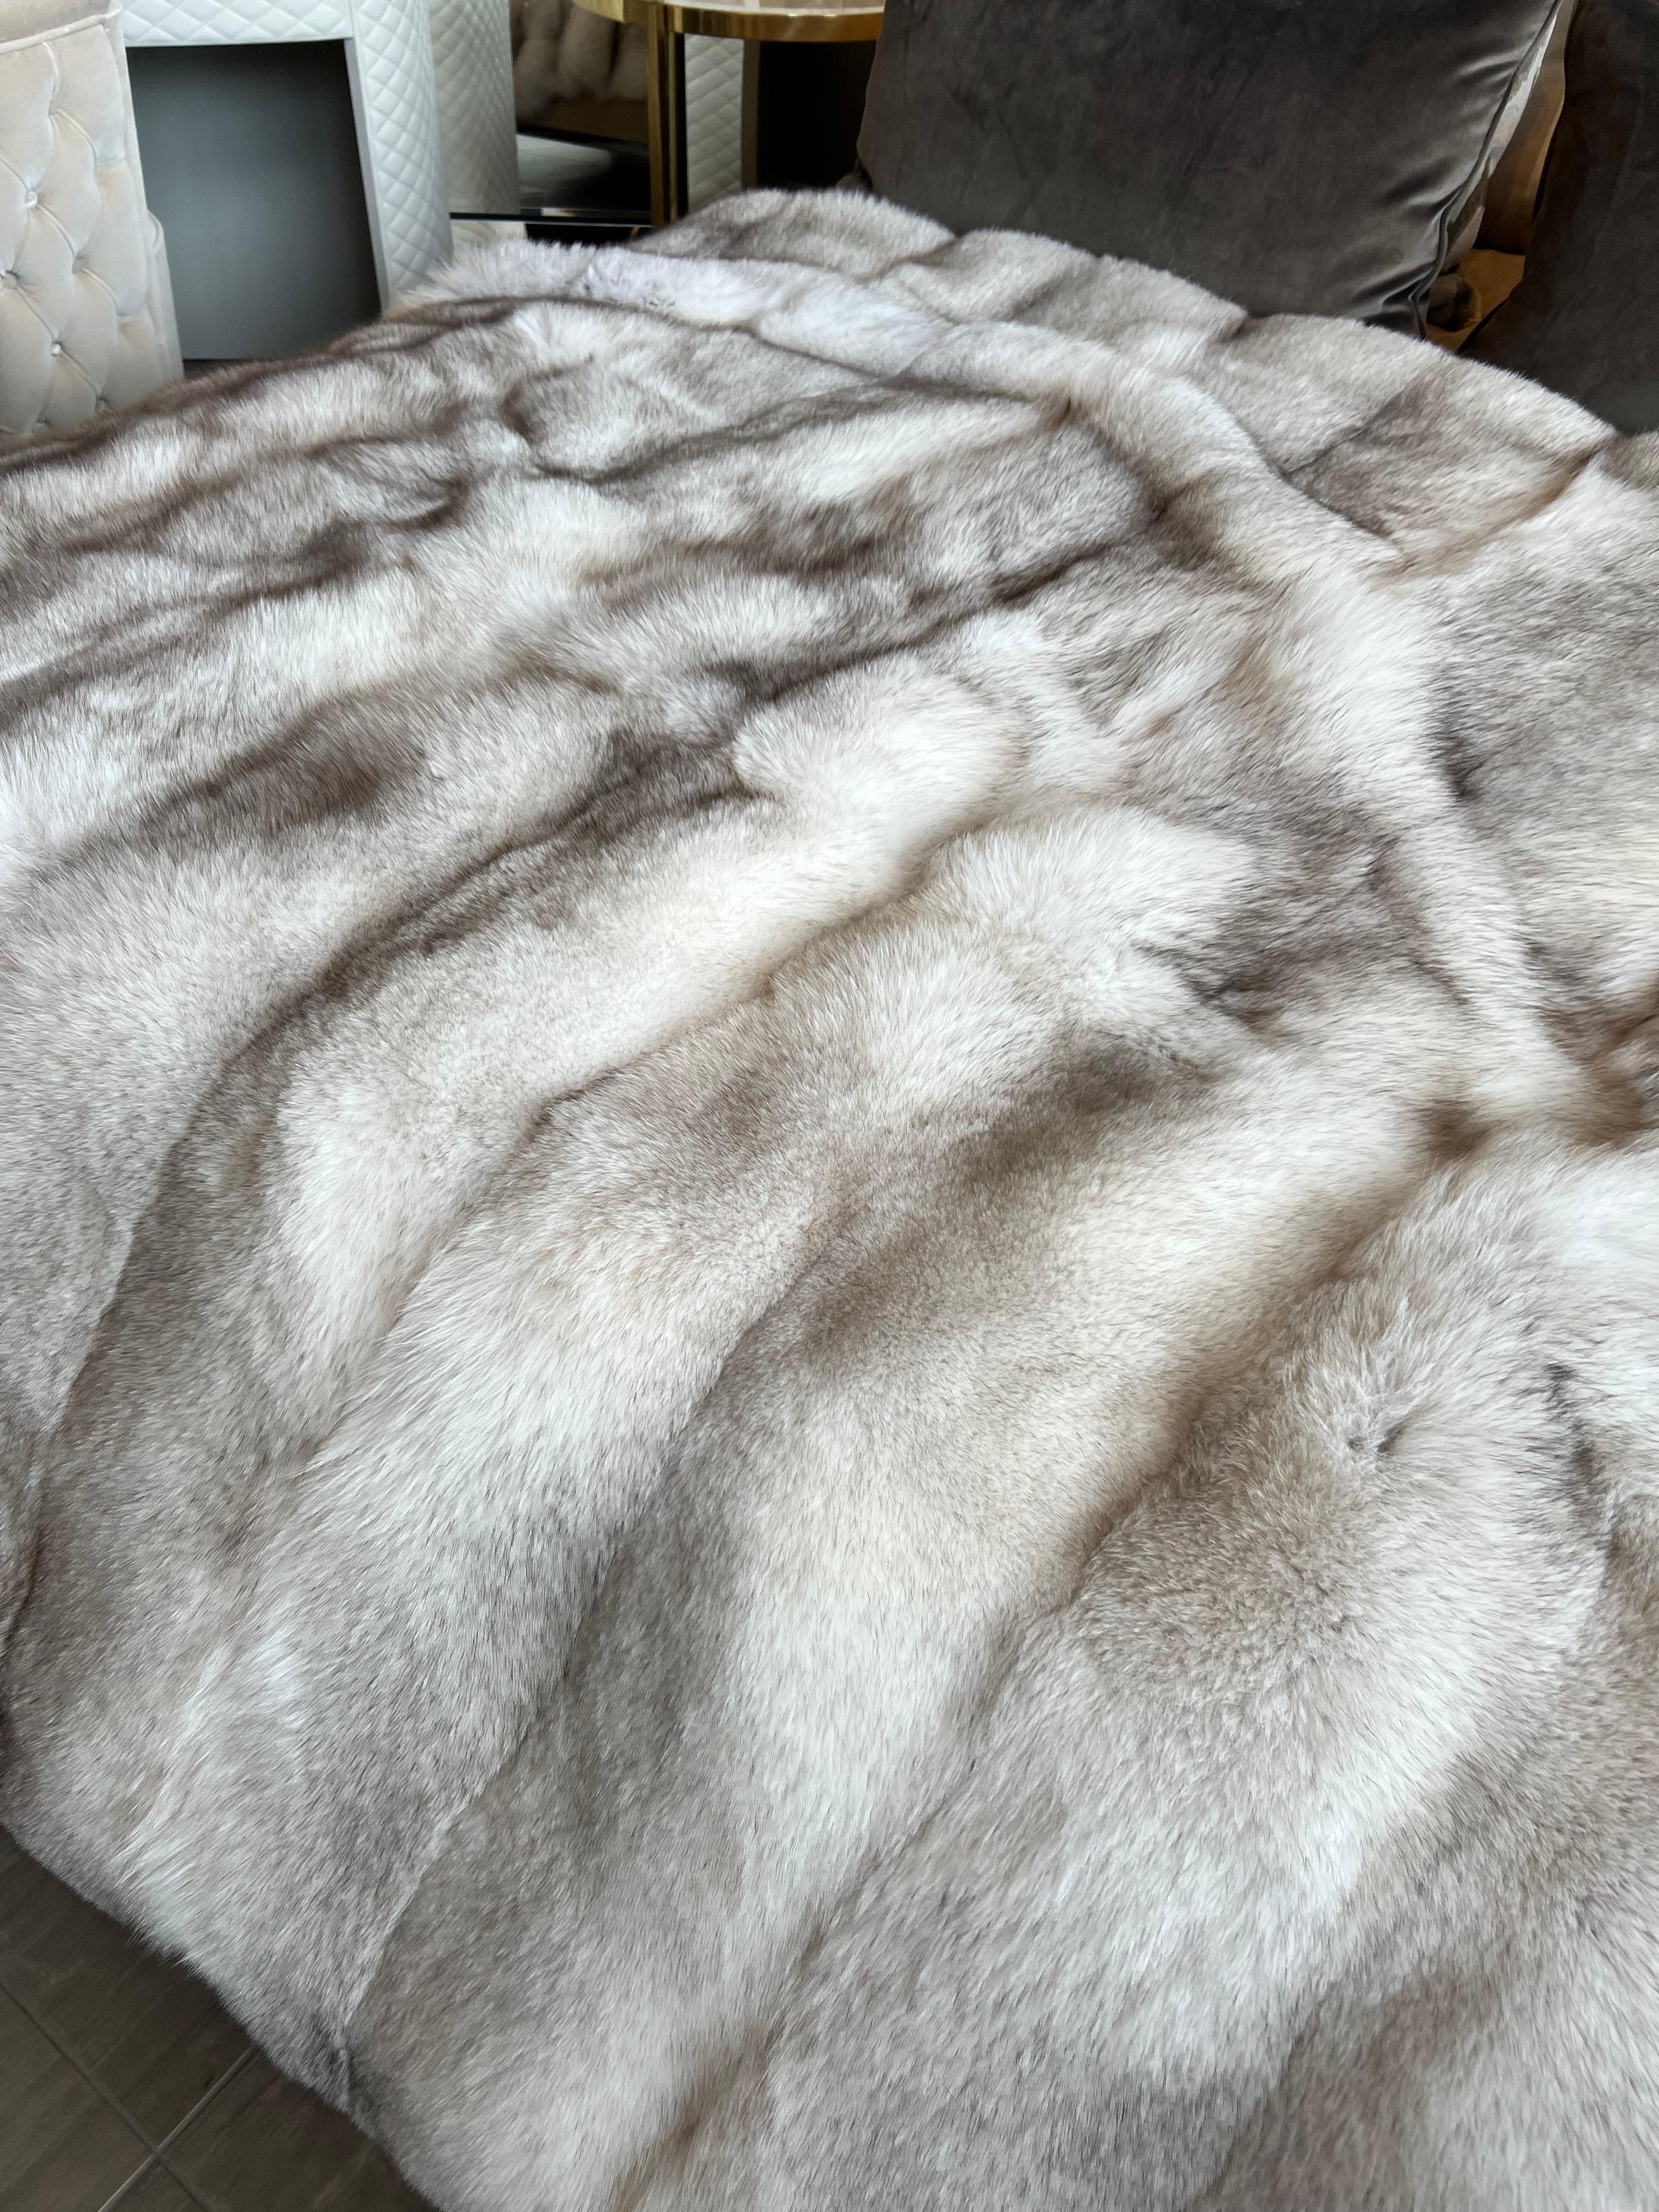 Natural blue fox Canadian dense fur throw. The name shouldn't fool you. The colour is actually white with a hint of grey tips.
This king size throw blanket has an ivory silk backing.